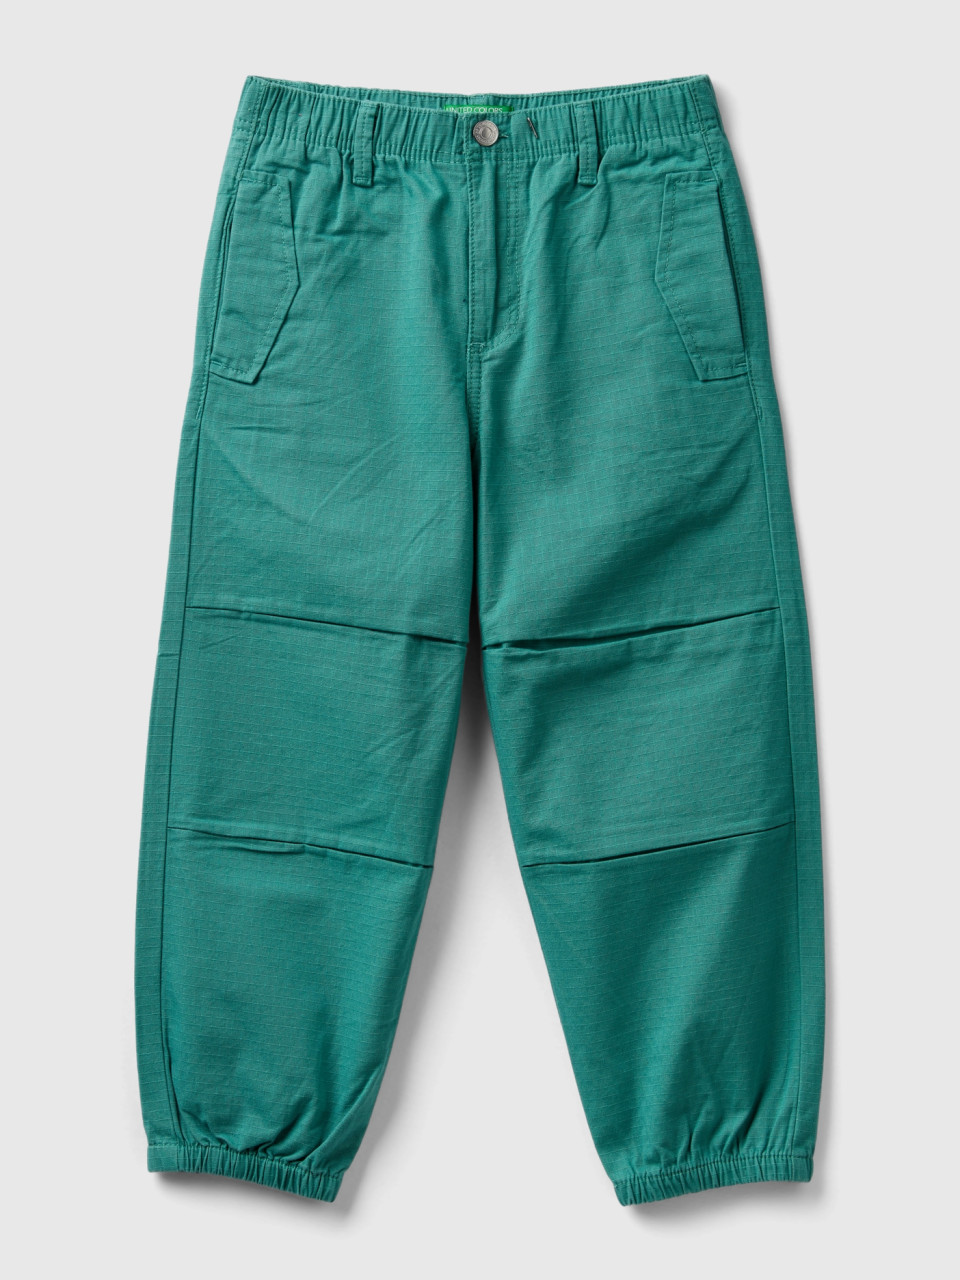 Benetton, 100% Cotton Trousers With Cuts, Light Green, Kids